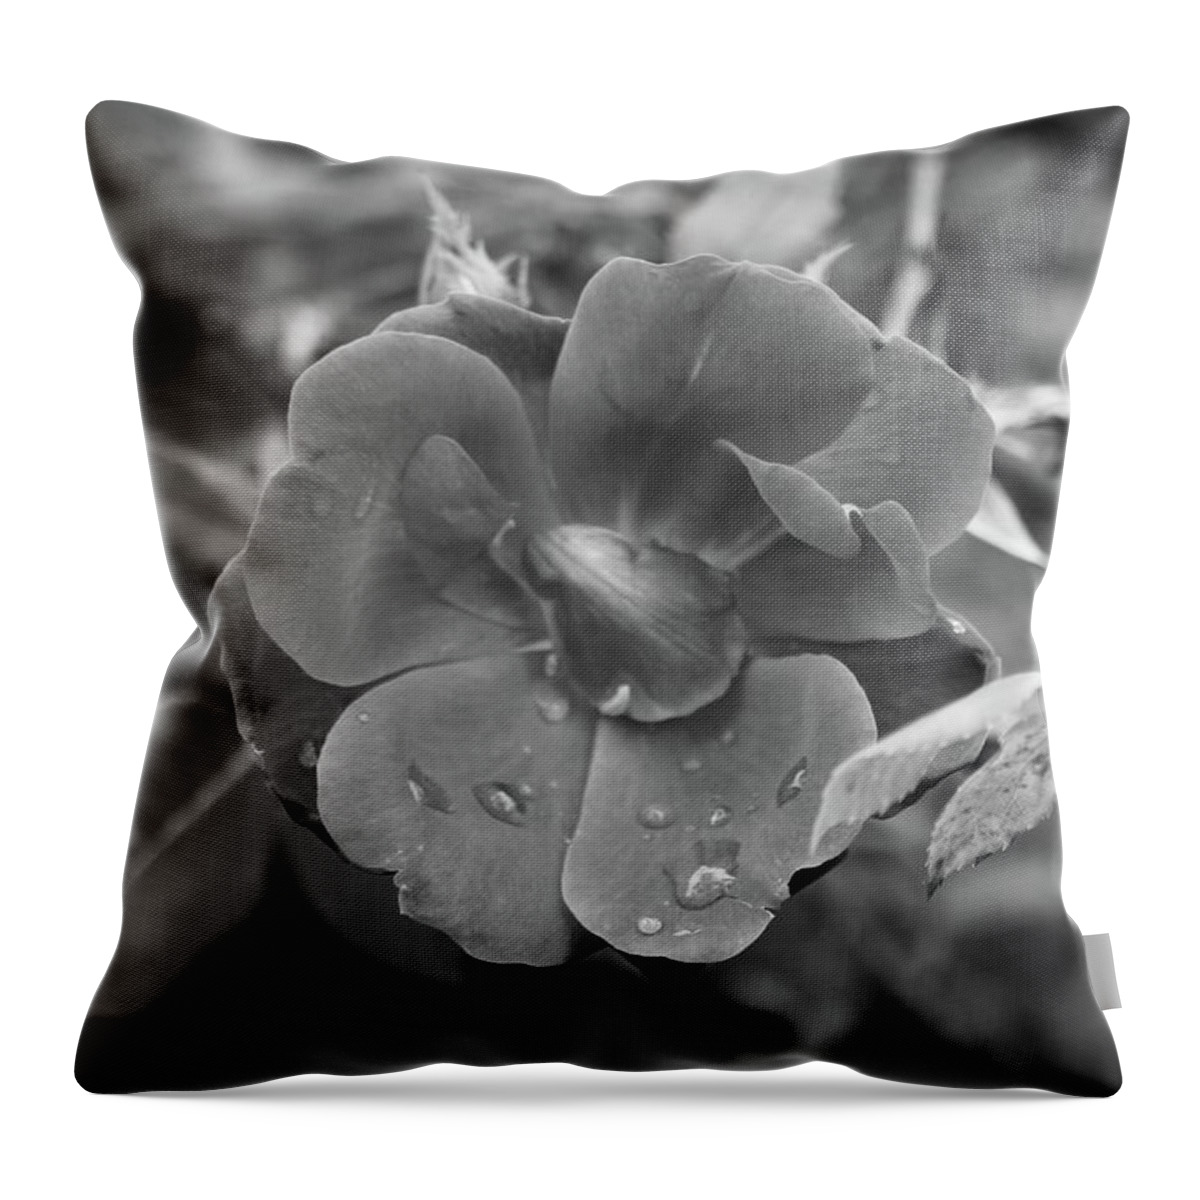 Photo For Sale Throw Pillow featuring the photograph Just a few Drops by Robert Wilder Jr